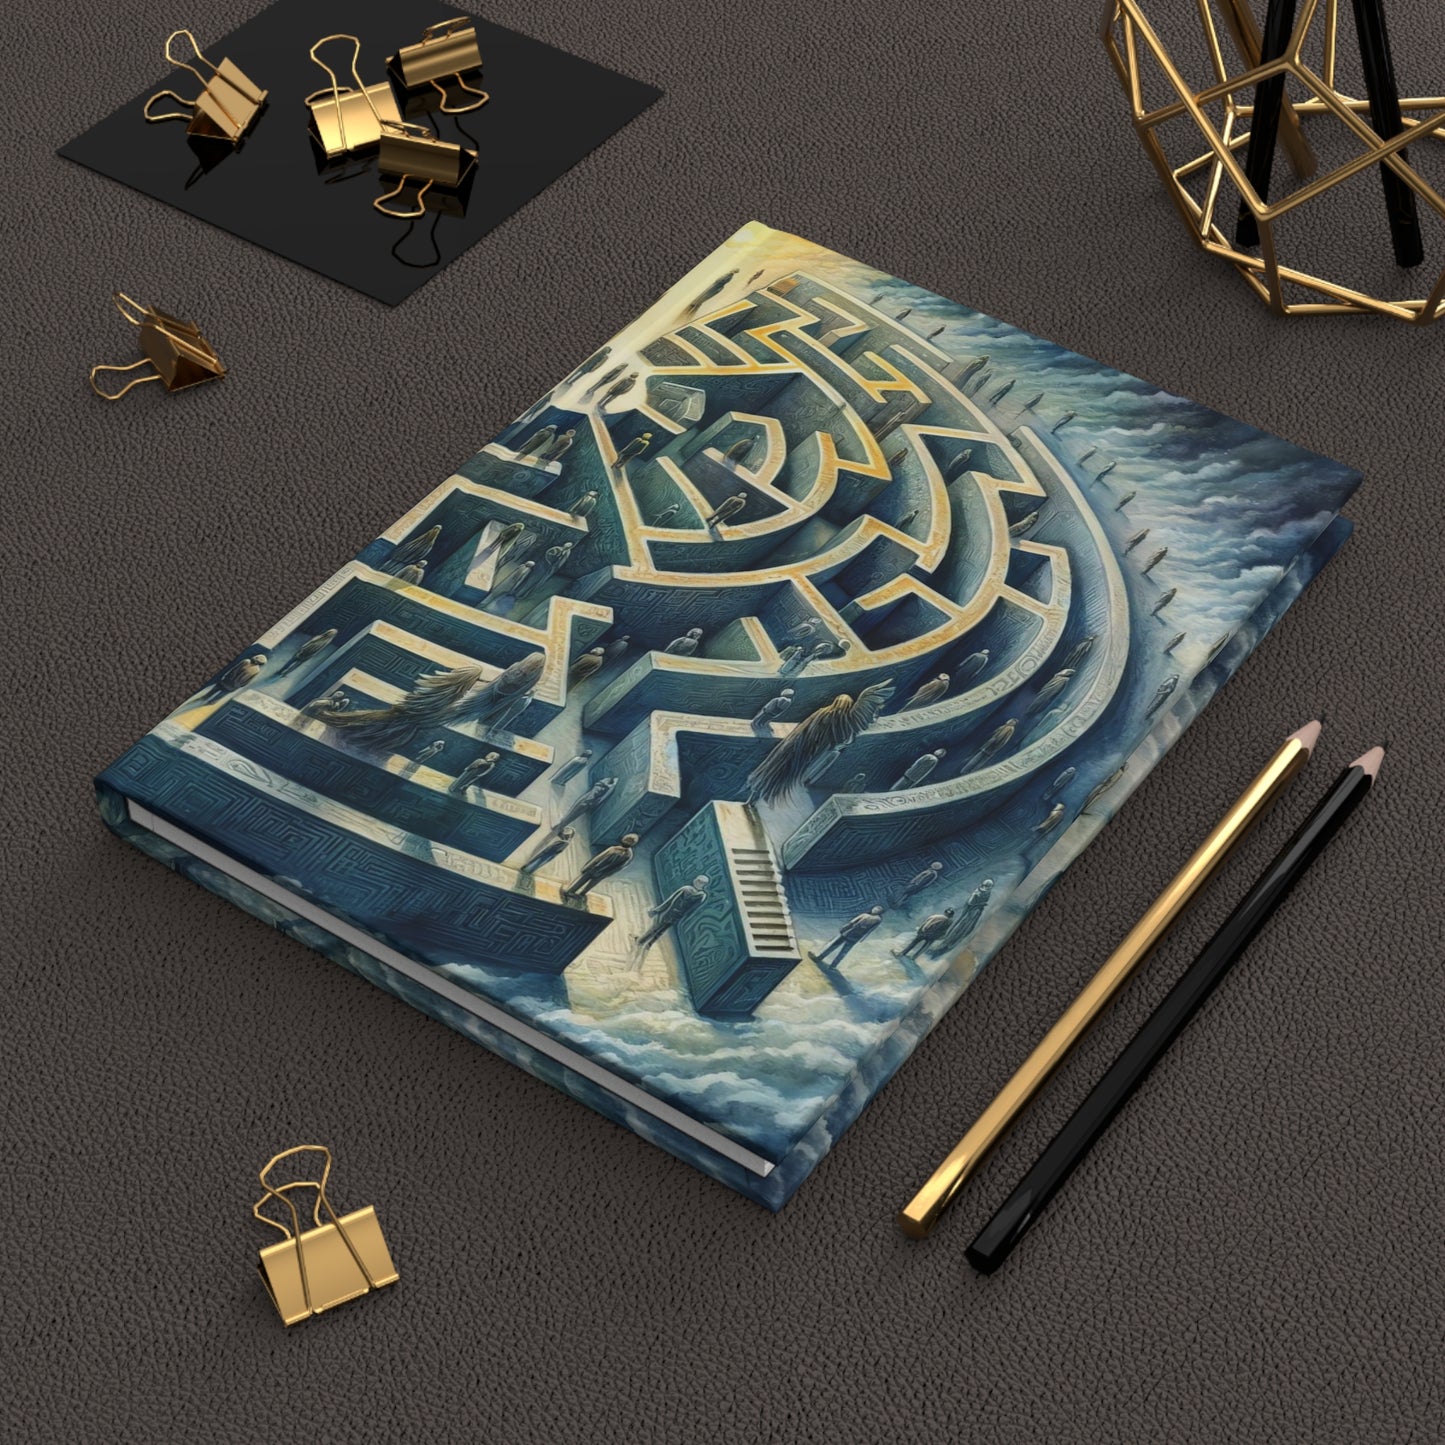 Labyrinth of Choices Hardcover Journal Matte Finish- Artistic Notebook for Reflection - 150 Lined Pages for Writing (75 Sheets)